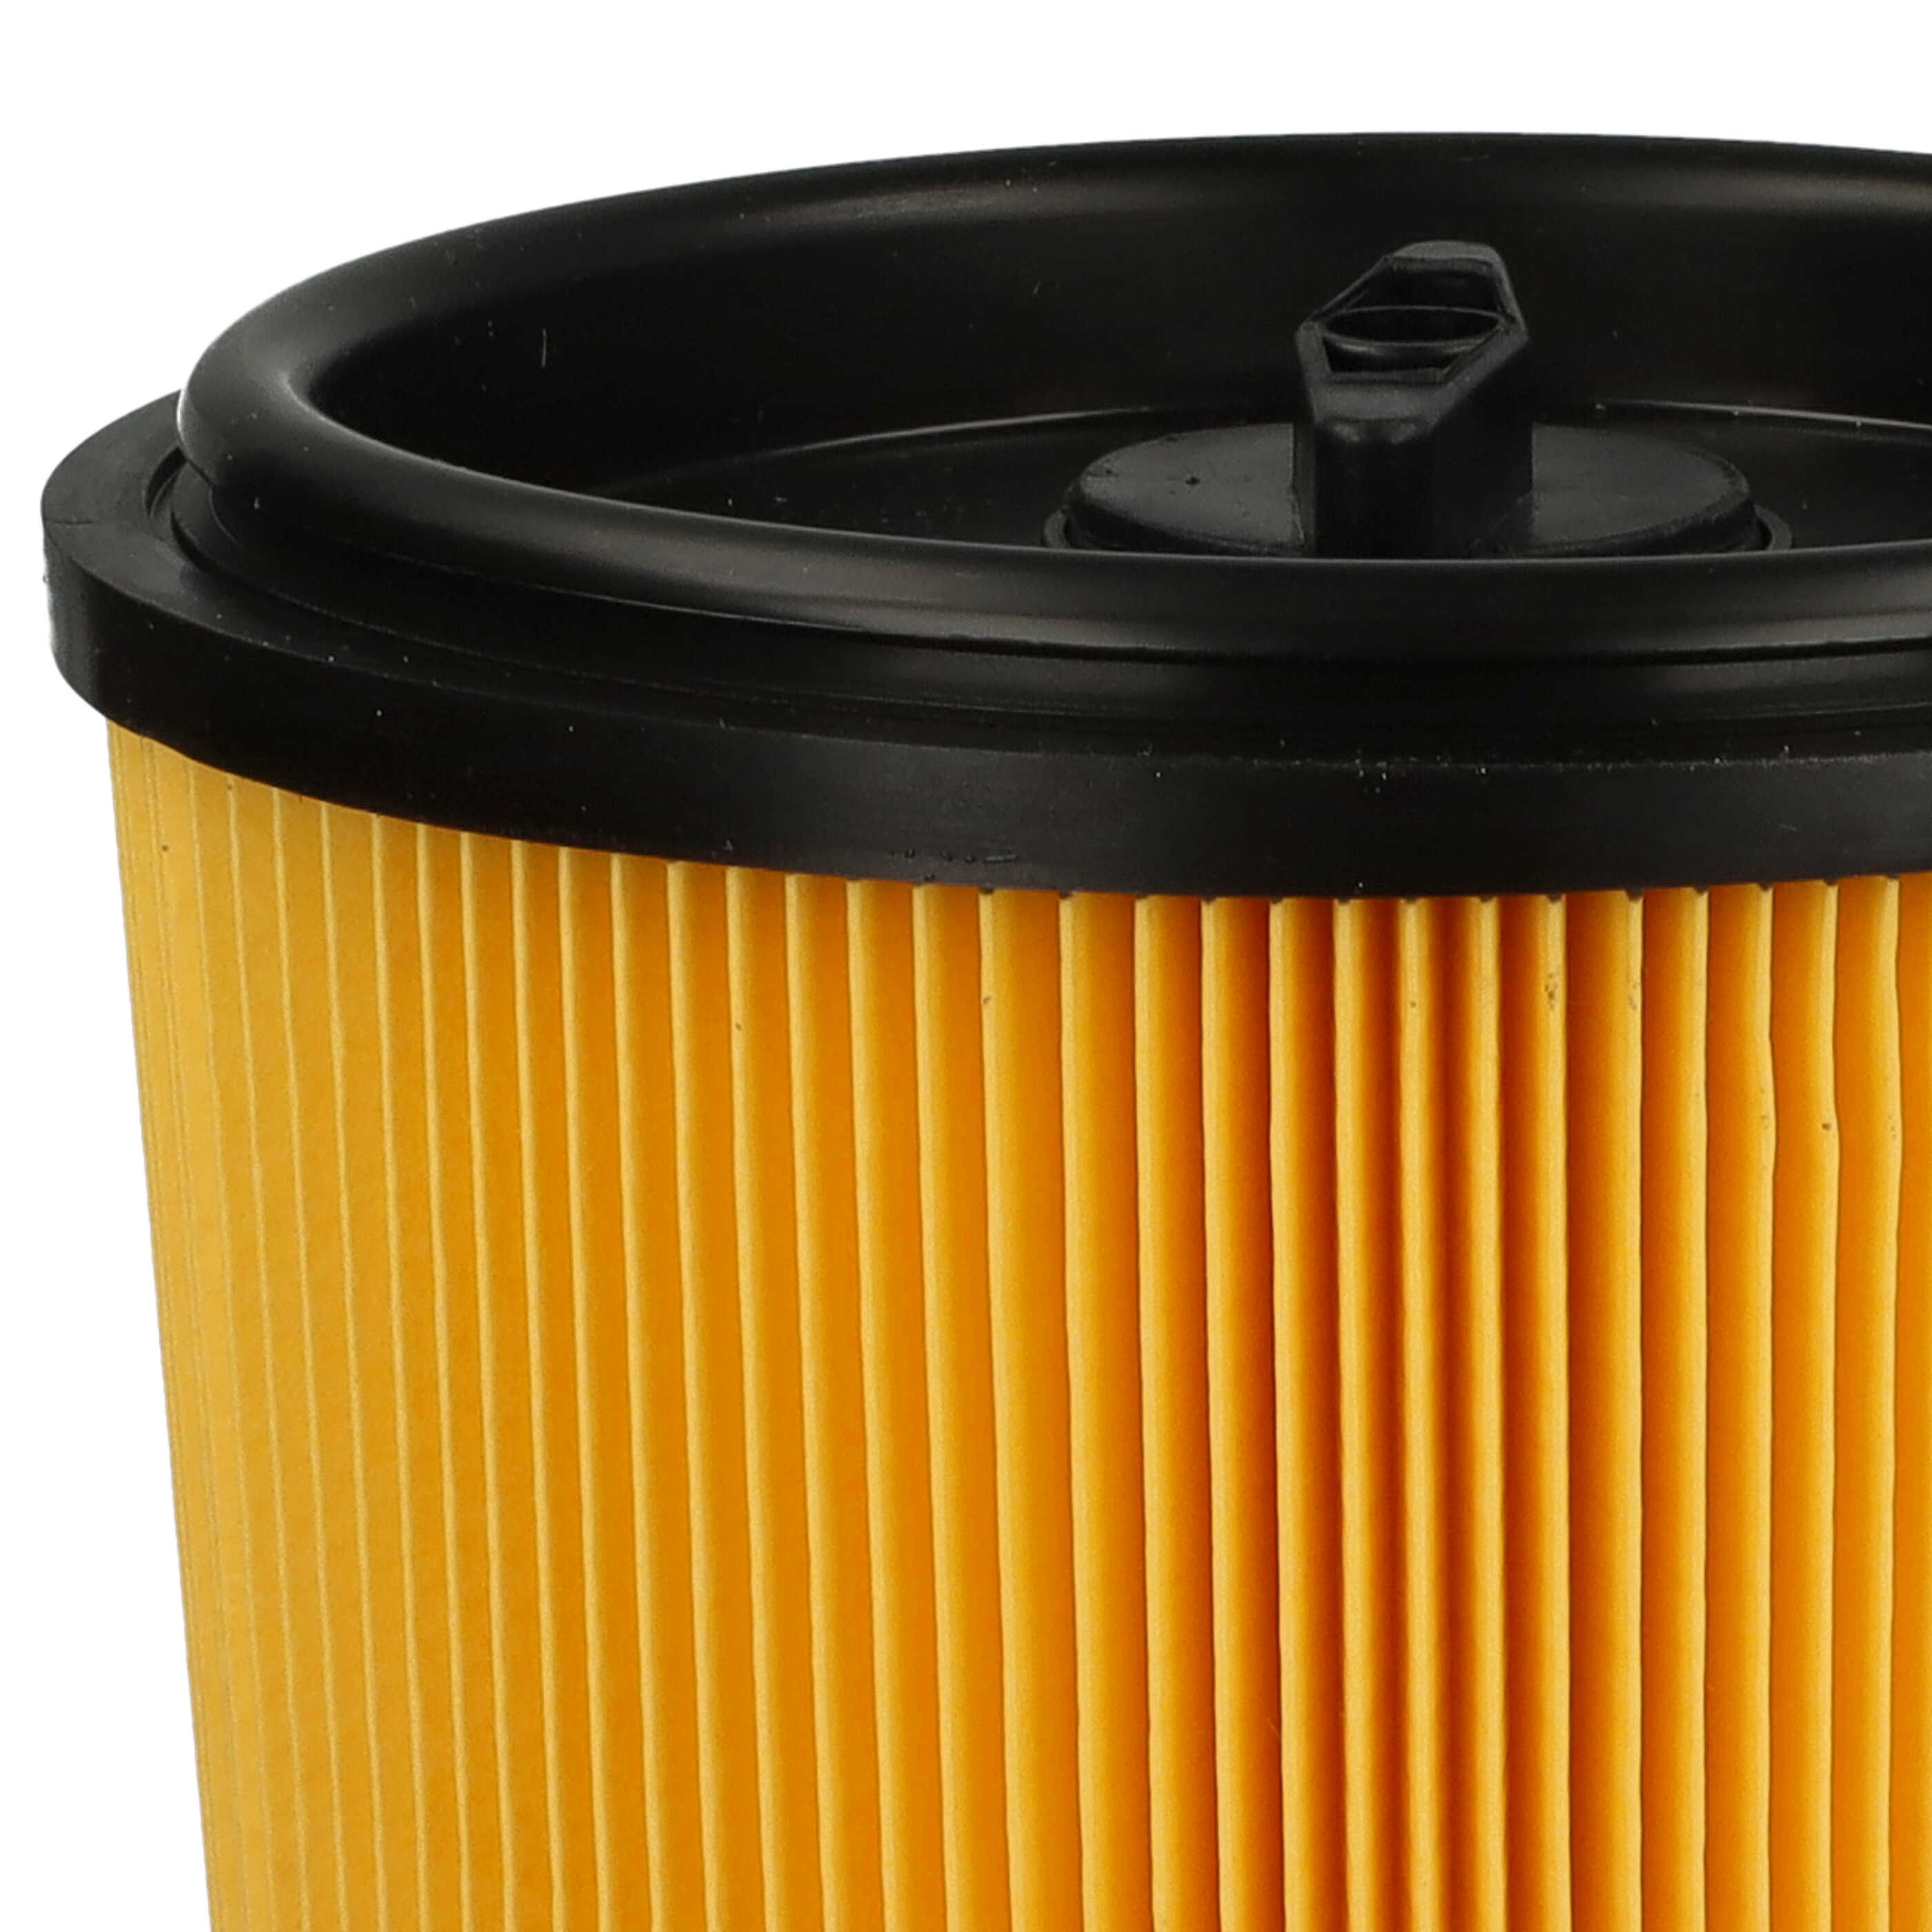 1x cartridge filter replaces Grizzly 91092030 for Aqua VacVacuum Cleaner, black / yellow